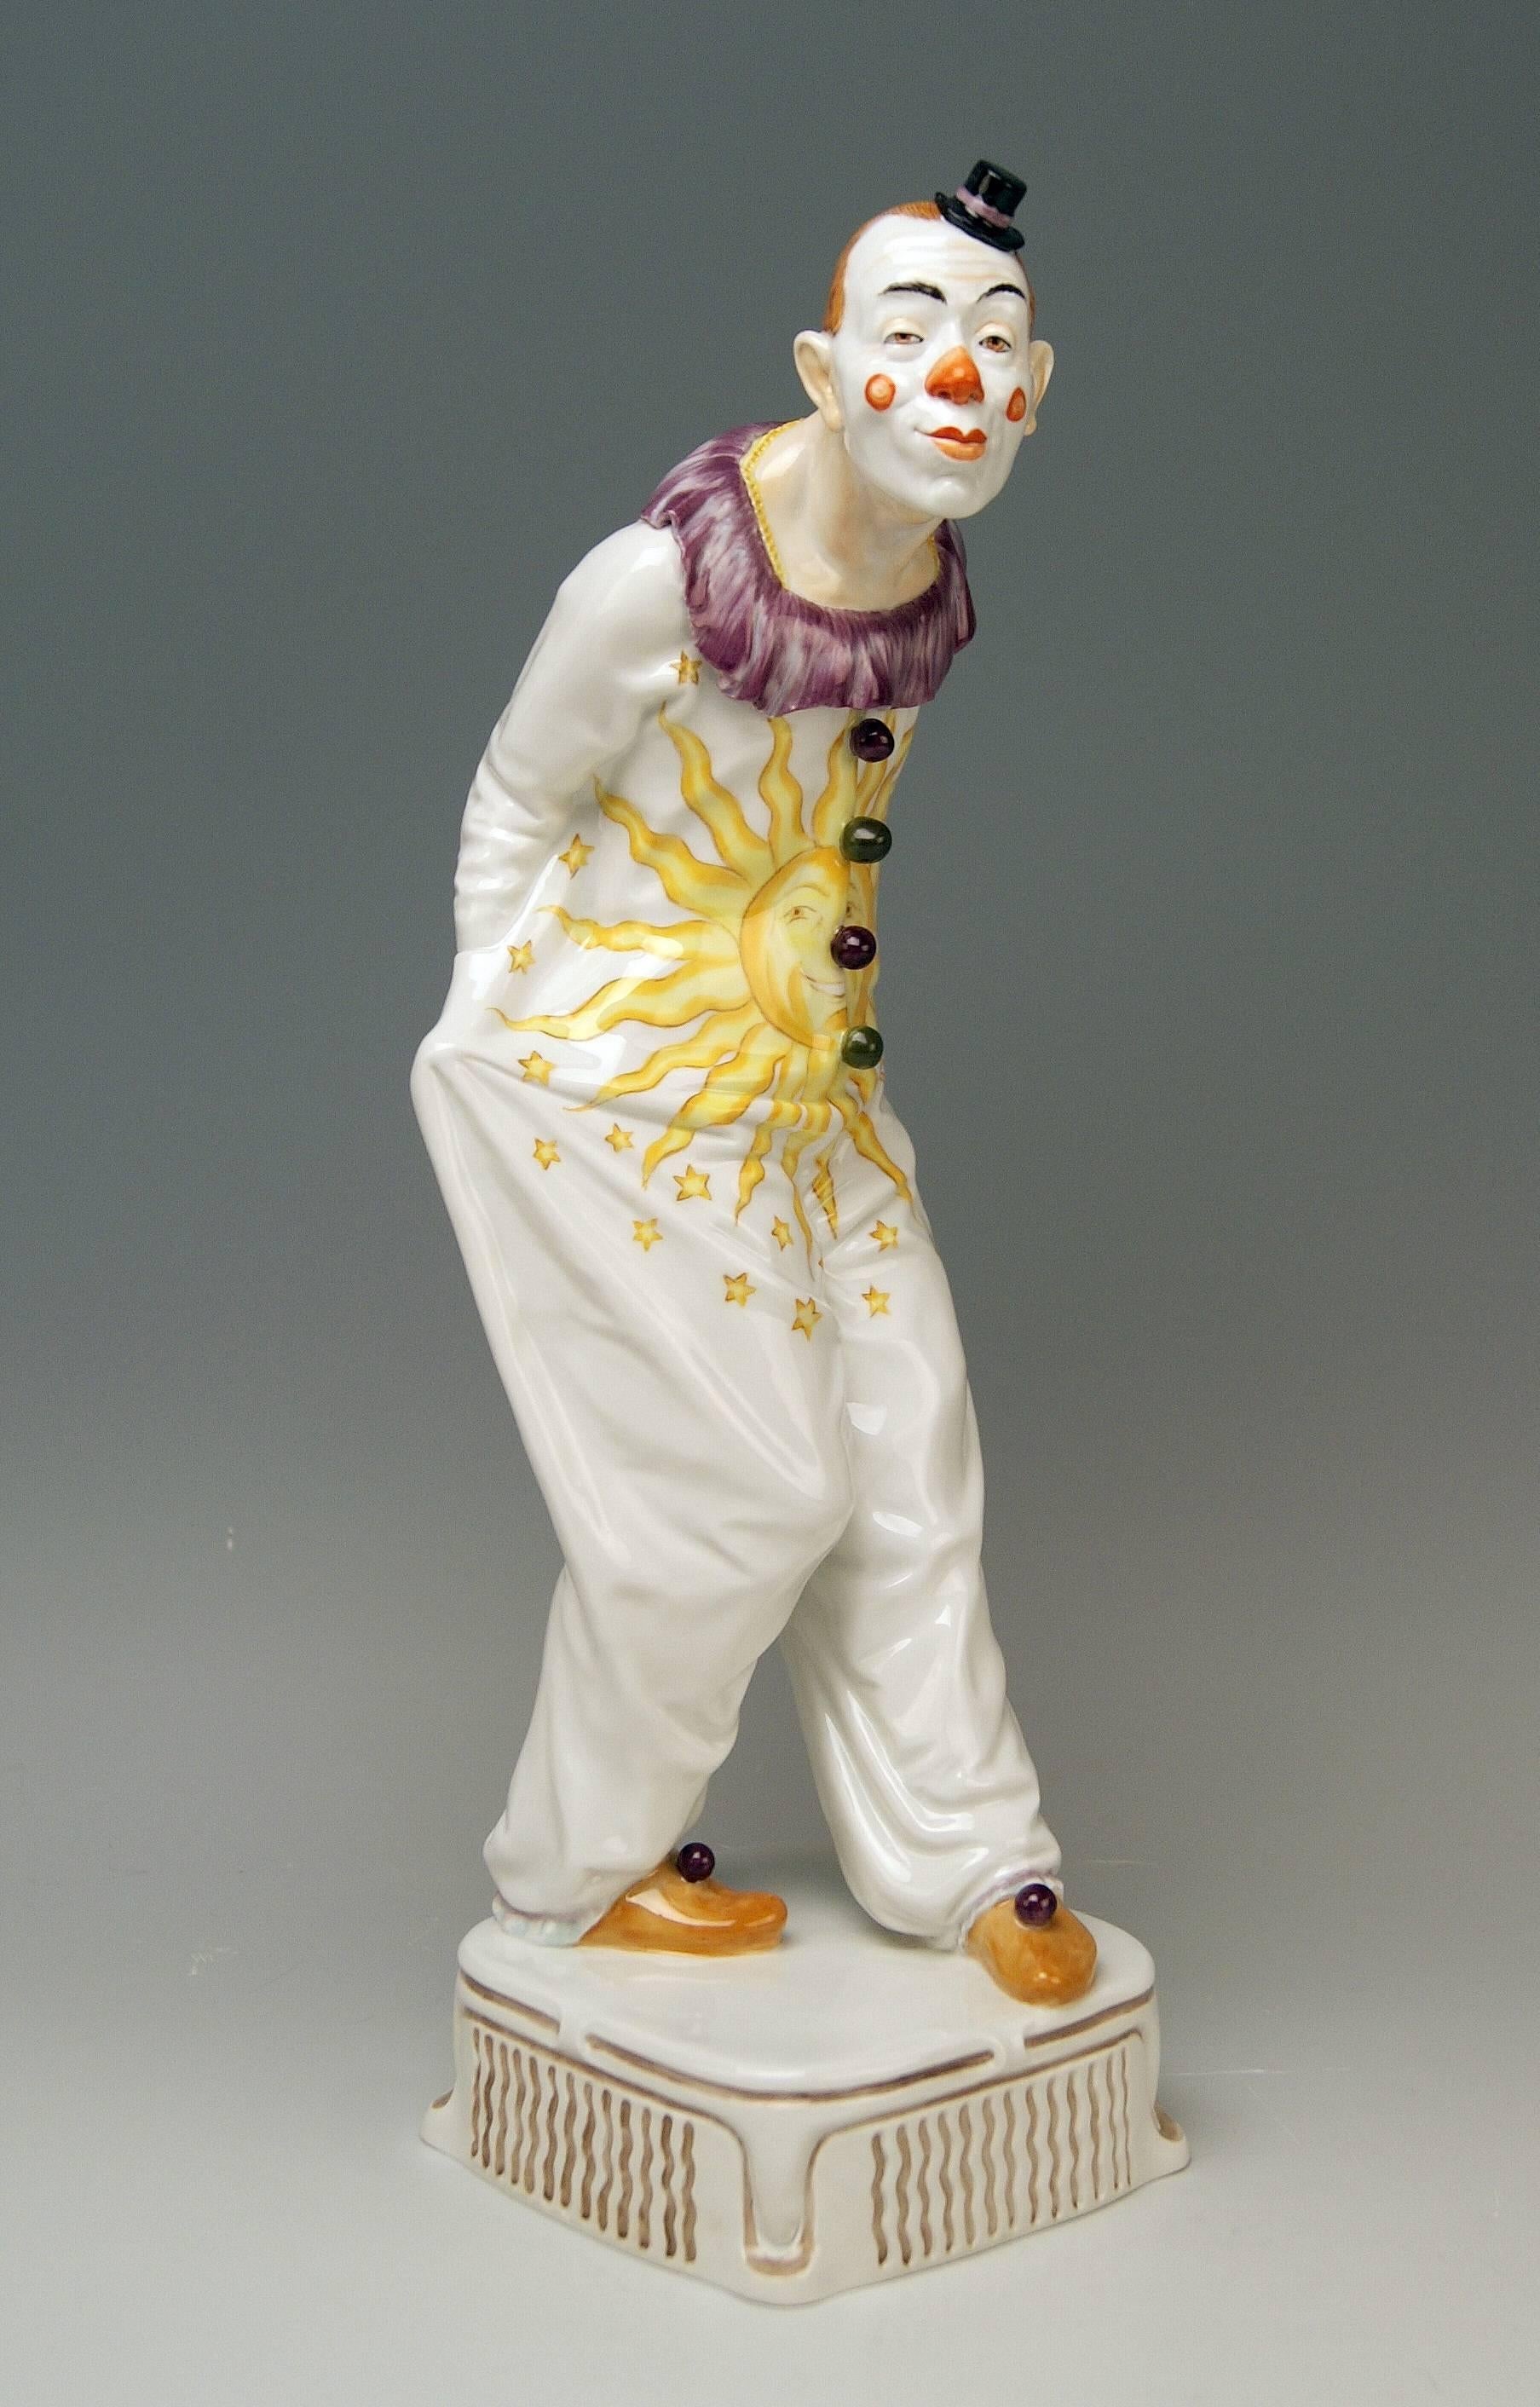 Meissen most remarkable as well as rare figurine:
Walking Pierrot attached to square base

Measures / Dimensions:
height 13.77 inches / 35.0 cm 
measures of base: 3.93 x 4.33 inches / 10.0 x 11.0 cm.

Manufactory: Meissen
Hallmarked: Blue